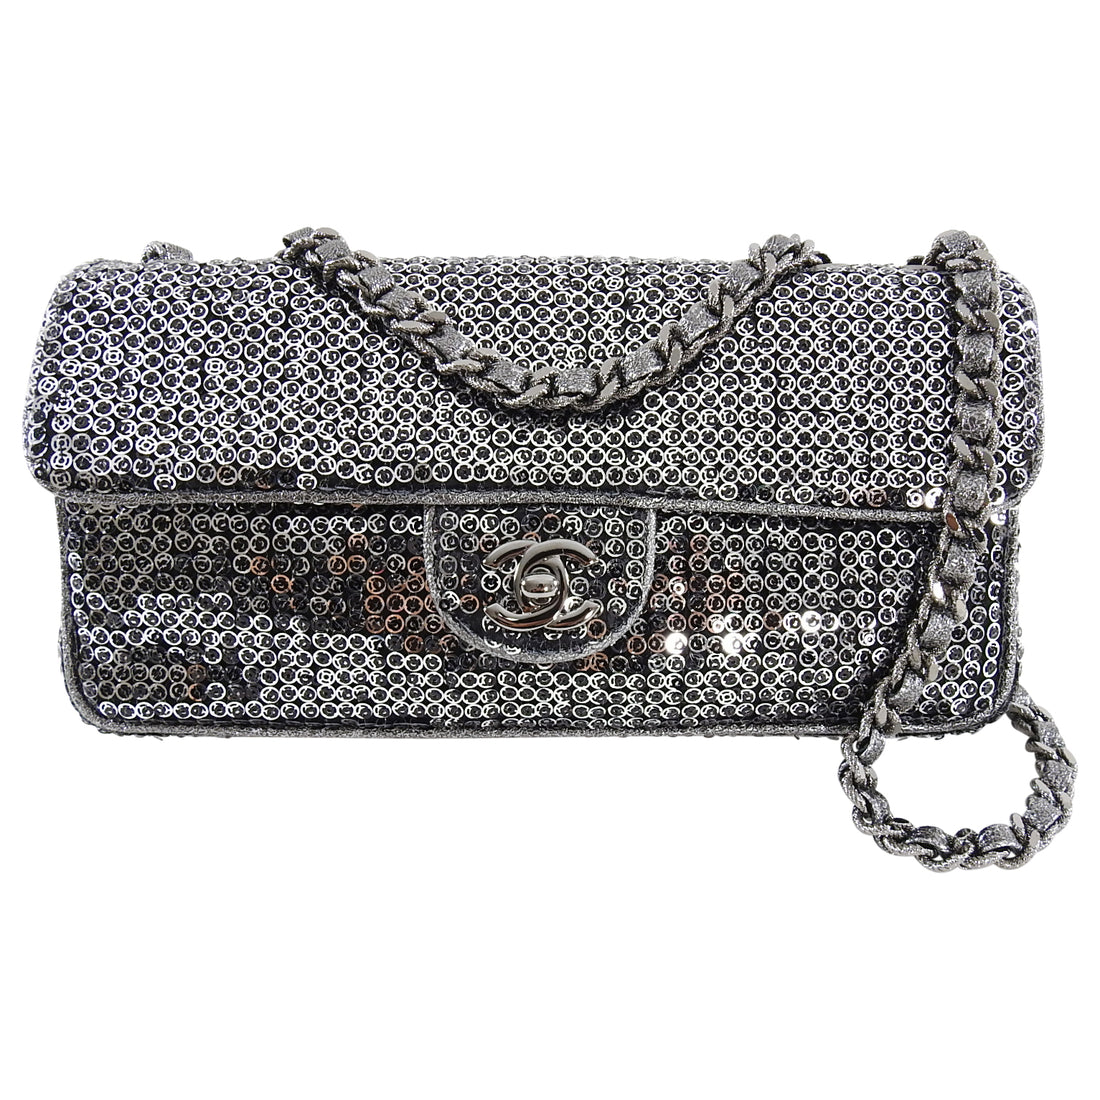 Chanel CC Flap Bag Sequin Embellished Satin Small - ShopStyle